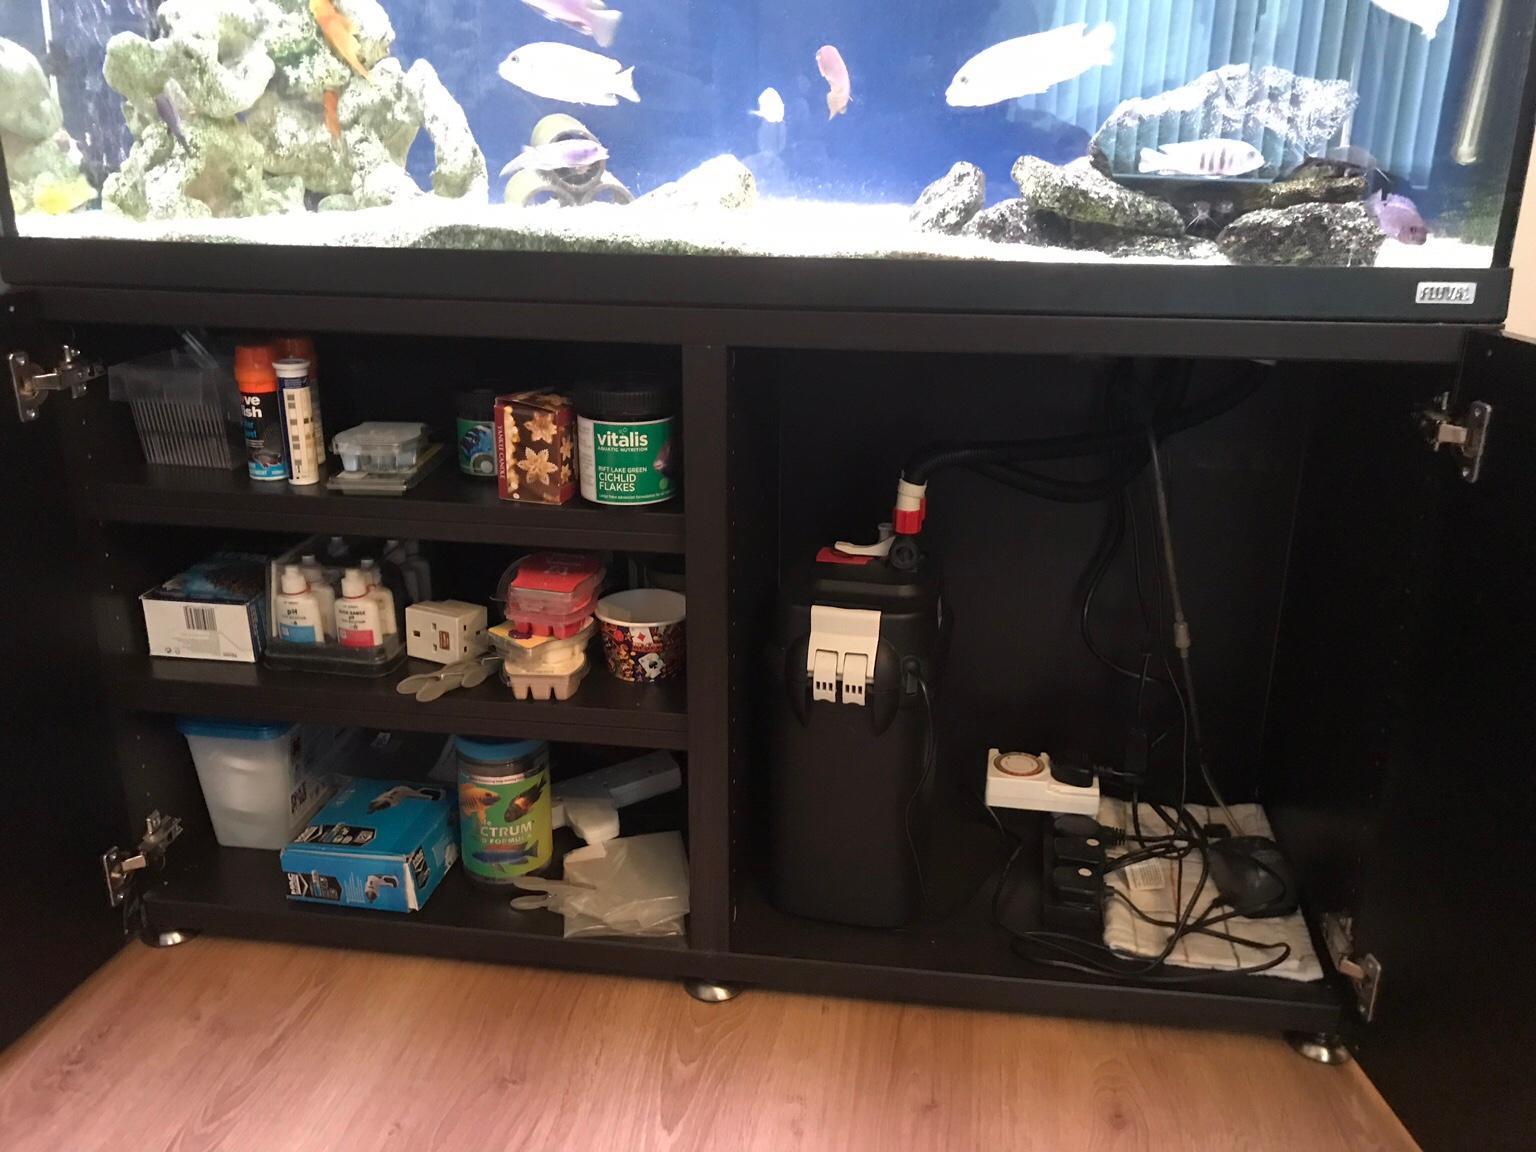 Fluval 240 Litres Fish Tank With Cabinet In Pe34 3dg King S Lynn